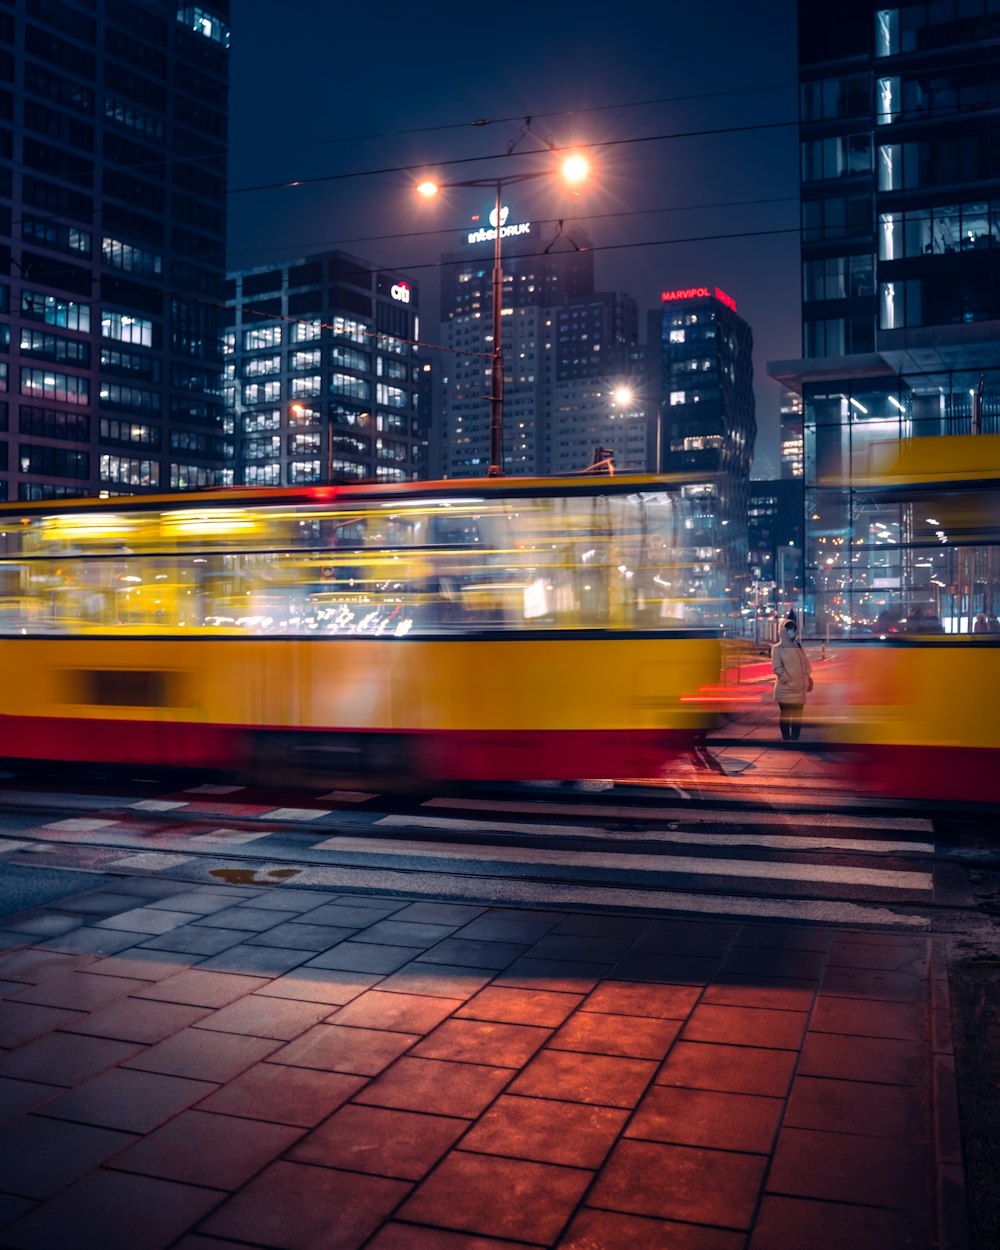 a yellow and red train traveling through a city at night